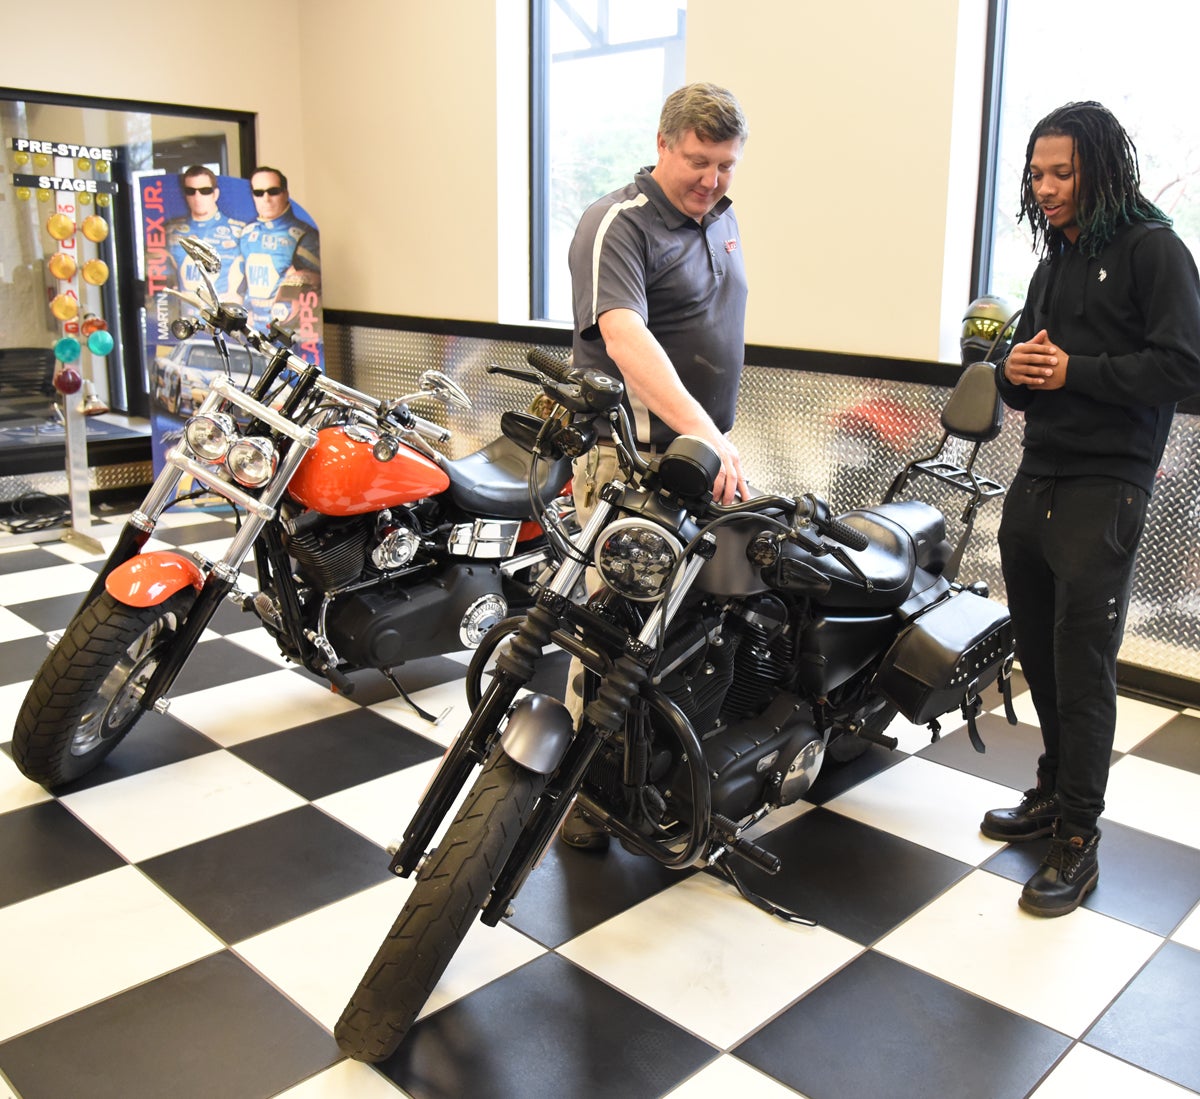 SGTC to offer Motorcycle Maintenance Program Spring Semester – Americus Times-Recorder